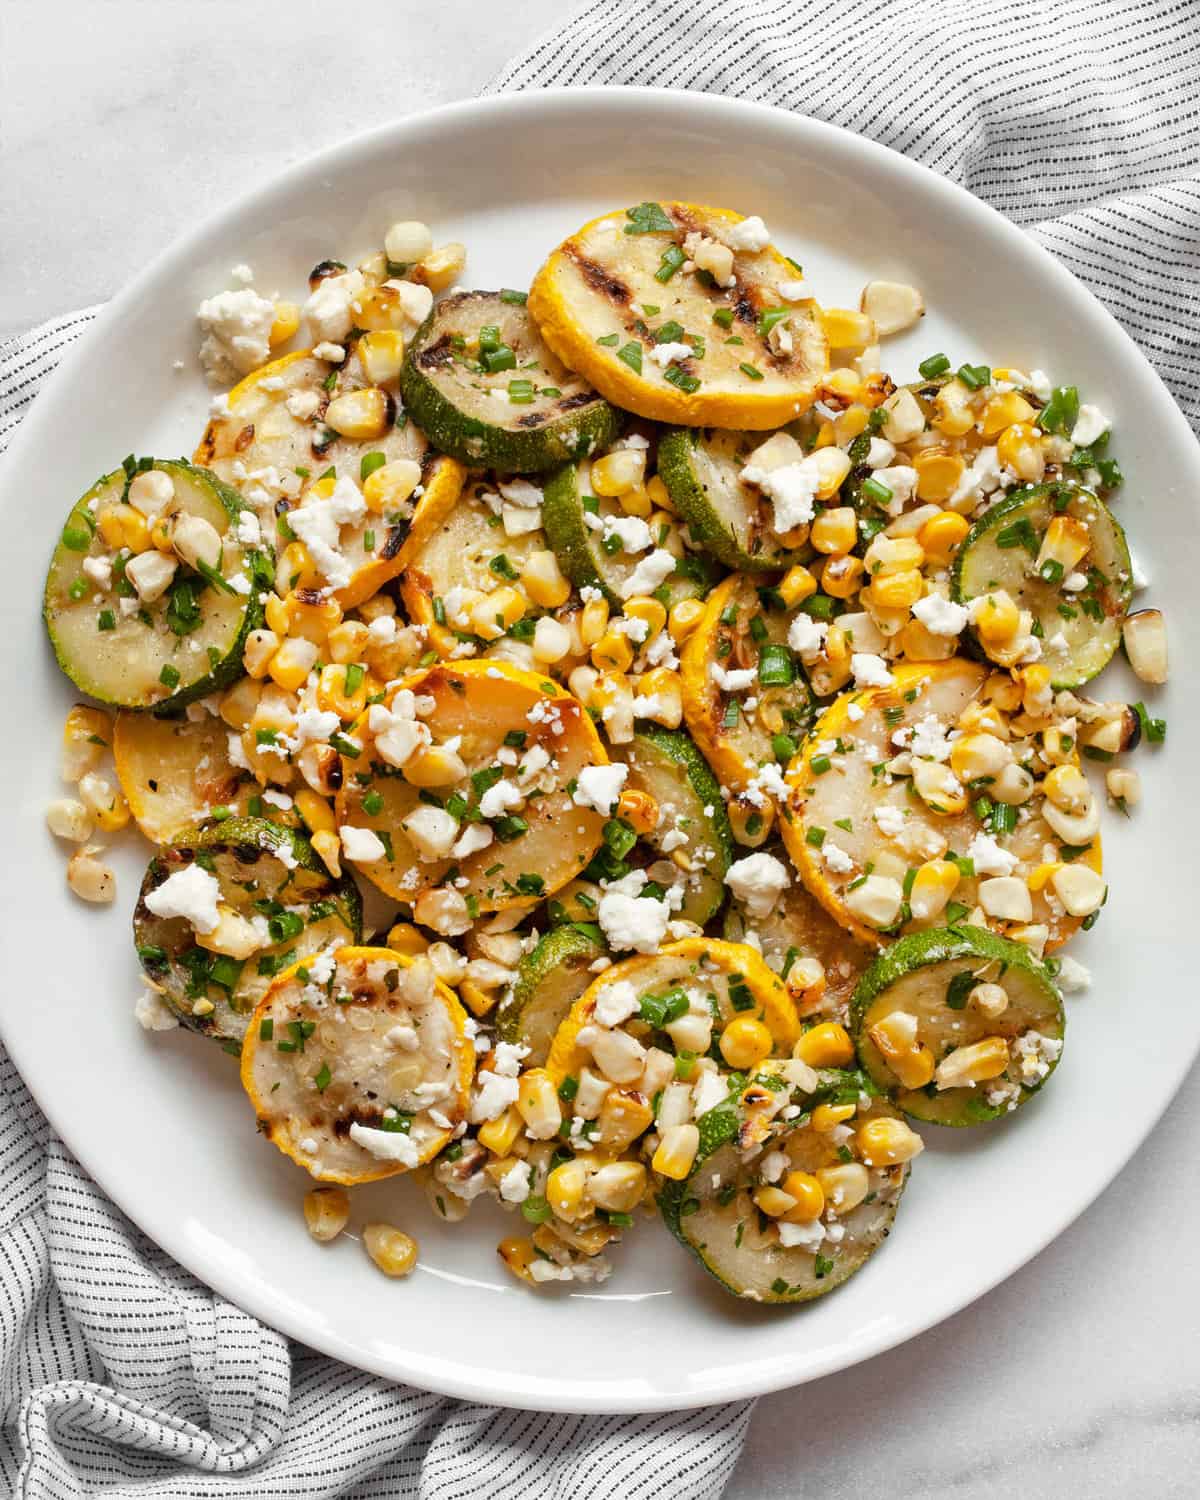 Grilled zucchini, squash and corn on a plate.